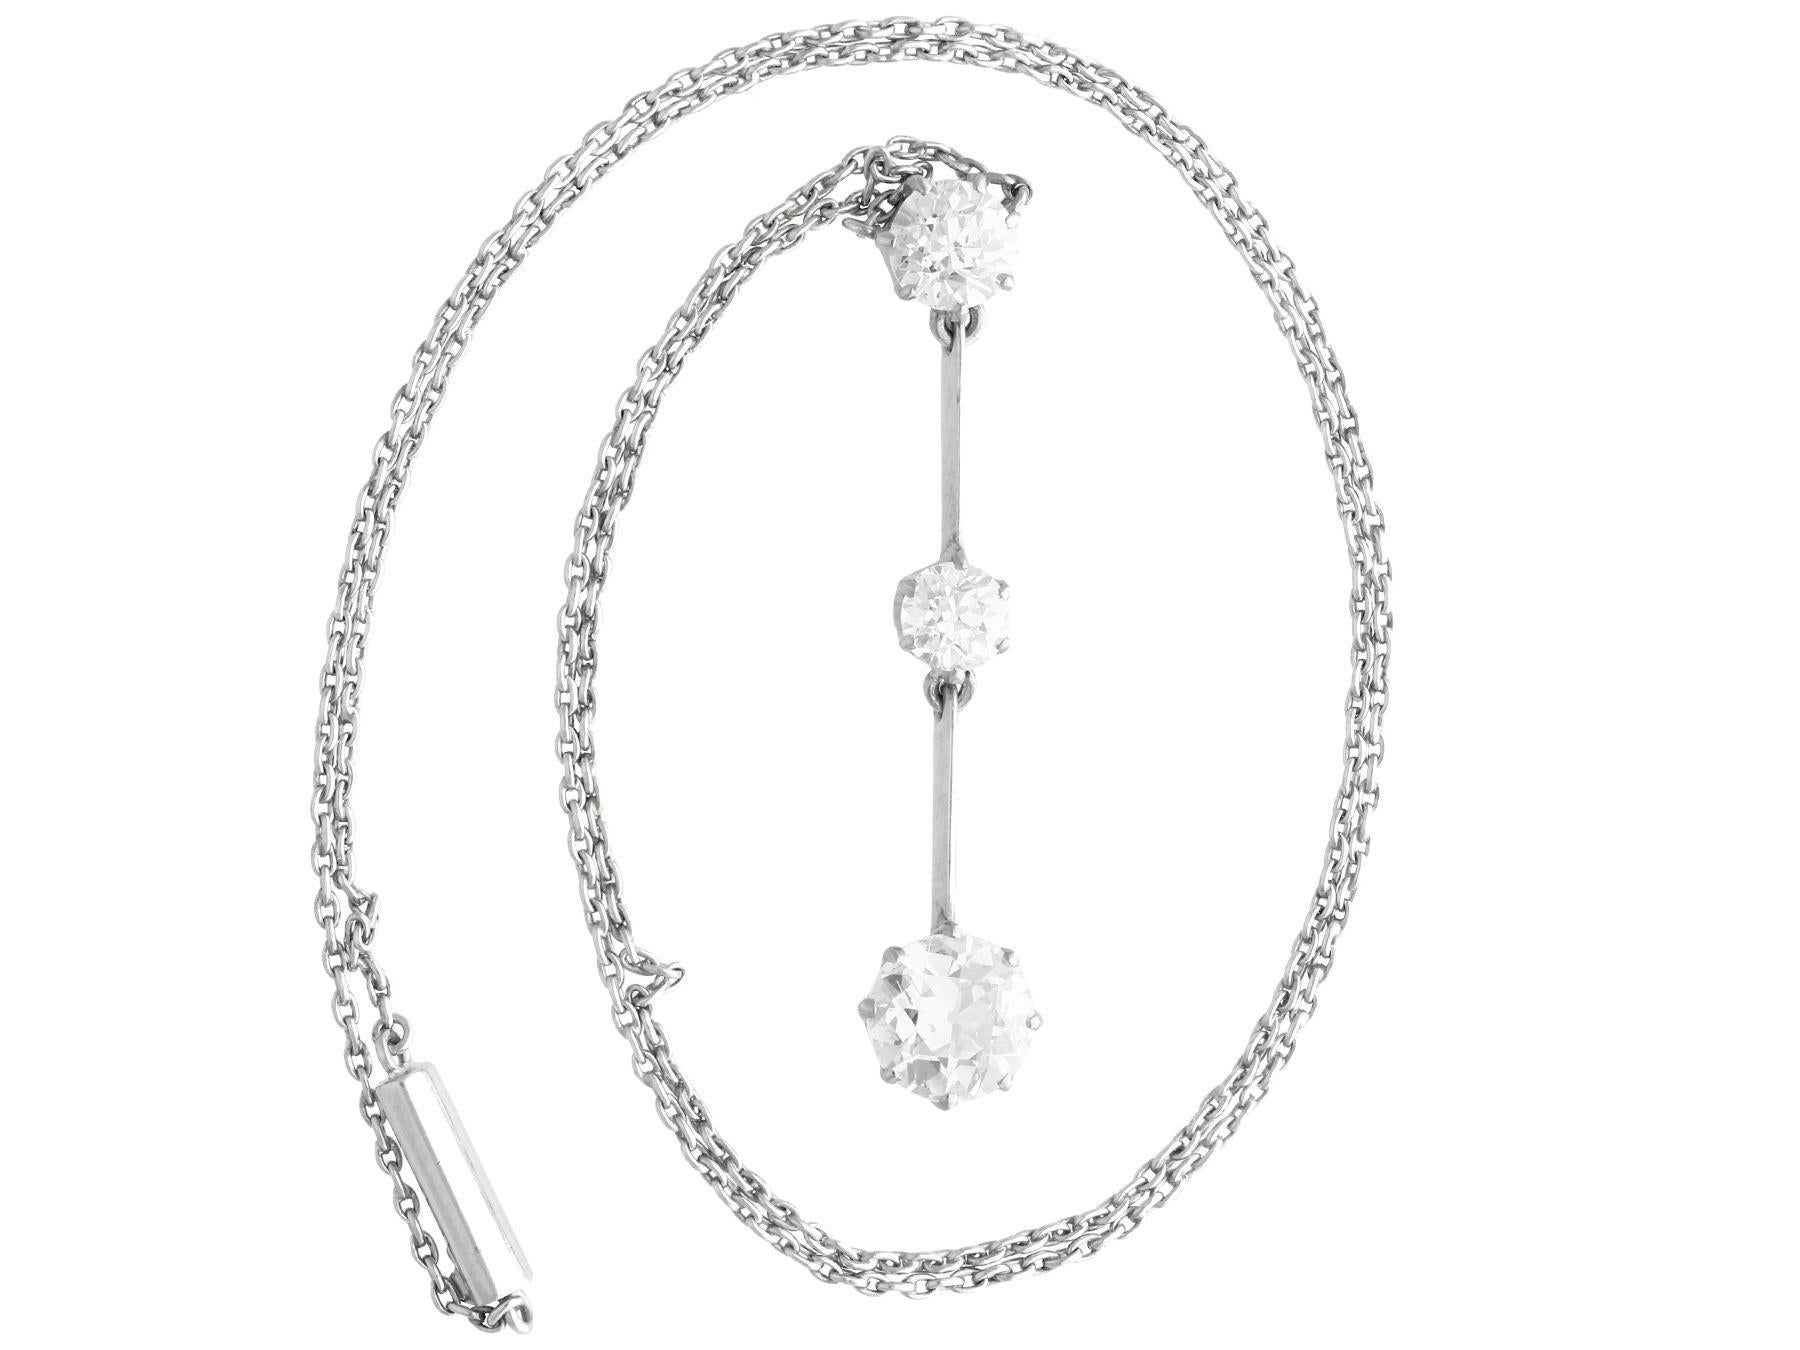 A stunning, fine and impressive antique 1.74 Carat diamond and platinum necklace; part of our diverse 1930's diamond jewelry collections.

This stunning antique diamond necklace has been crafted in platinum.

The necklace features a stunning